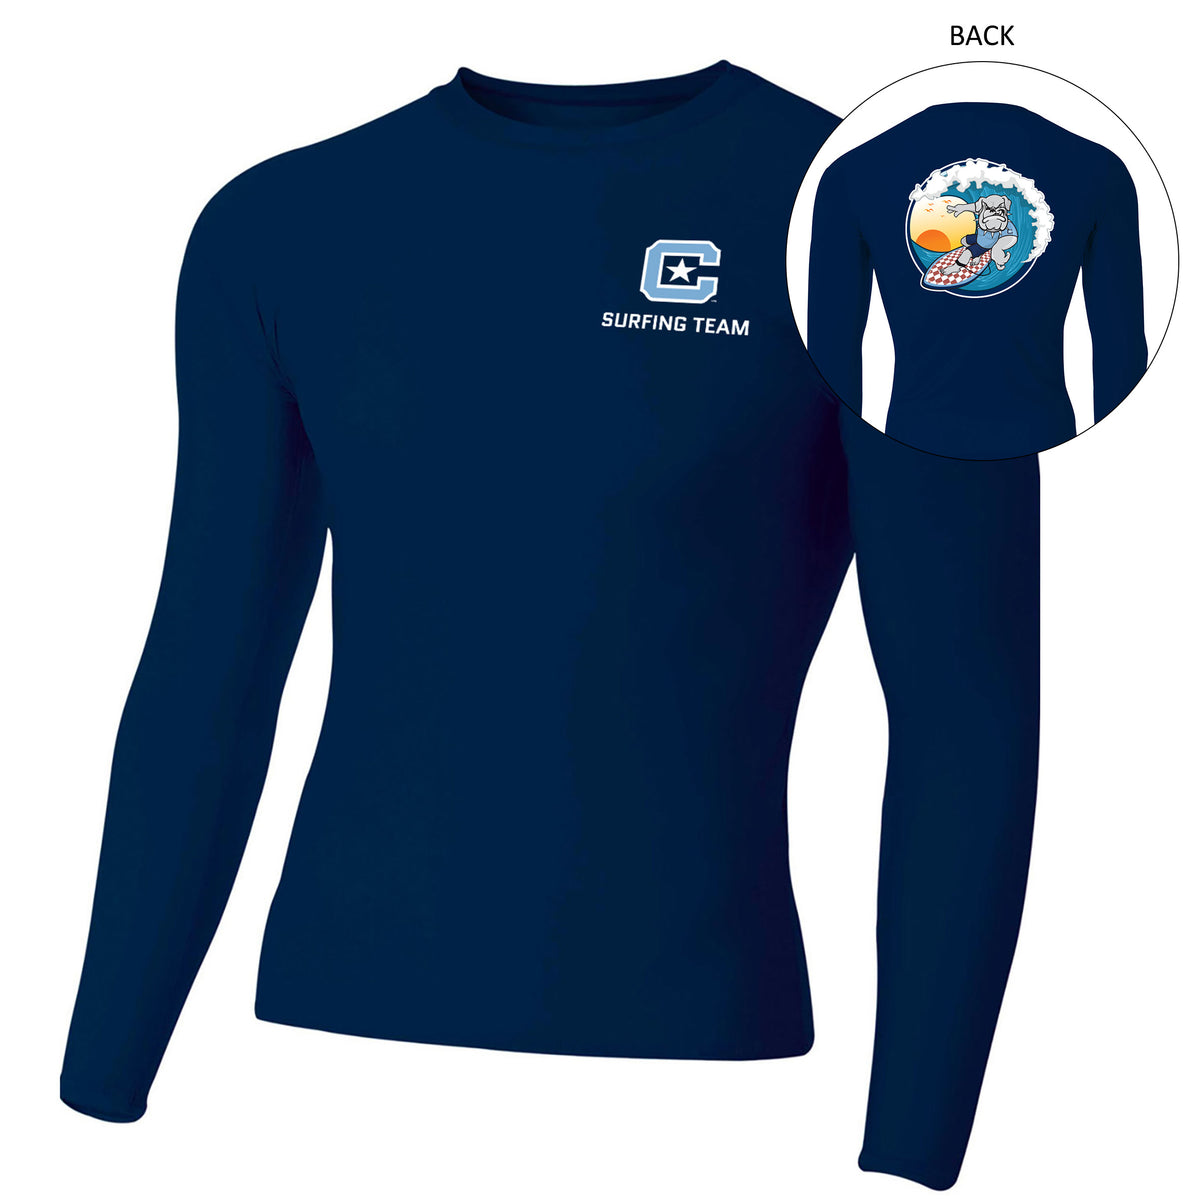 The Citadel, Club Sports - Surfing Team, A4 Adult Polyester Spandex Long Sleeve Compression T-Shirt